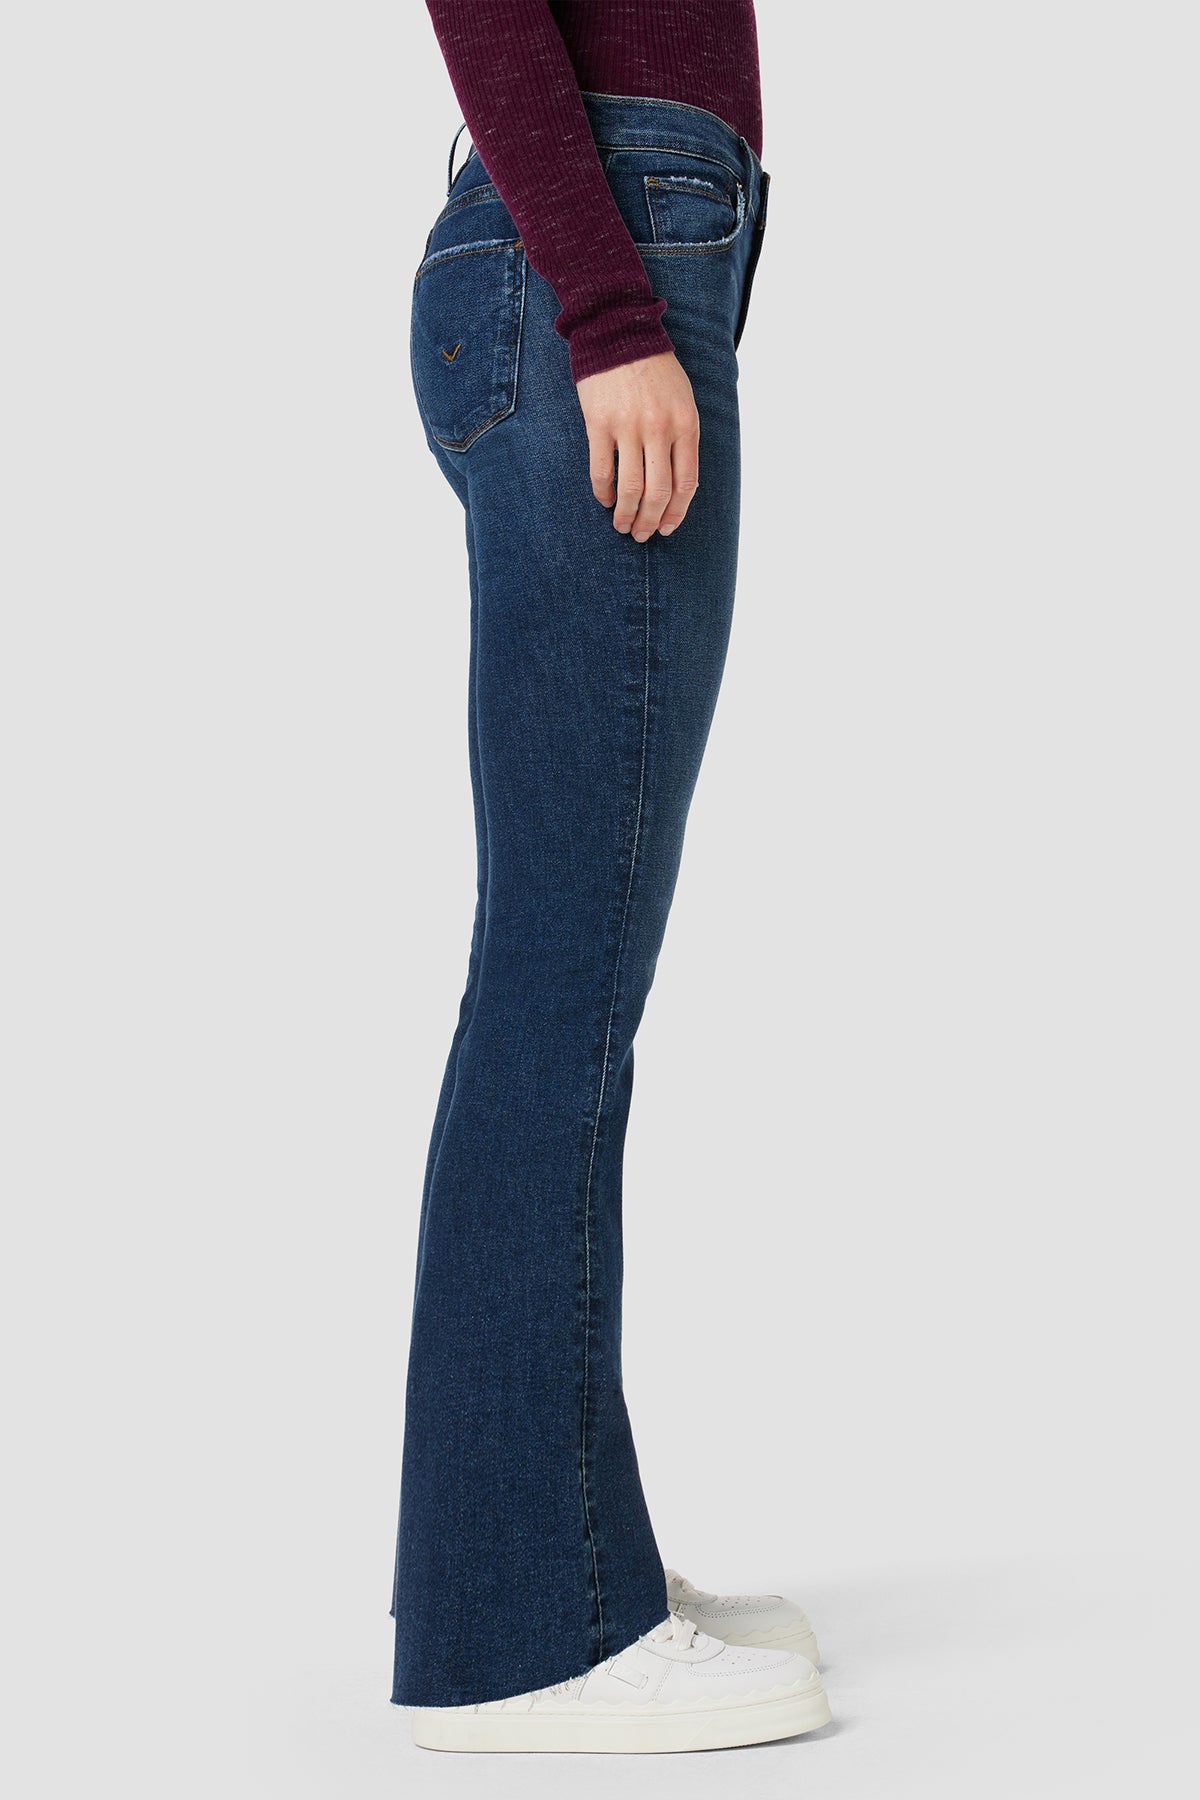 Nico Mid-Rise Barefoot Bootcut Jean